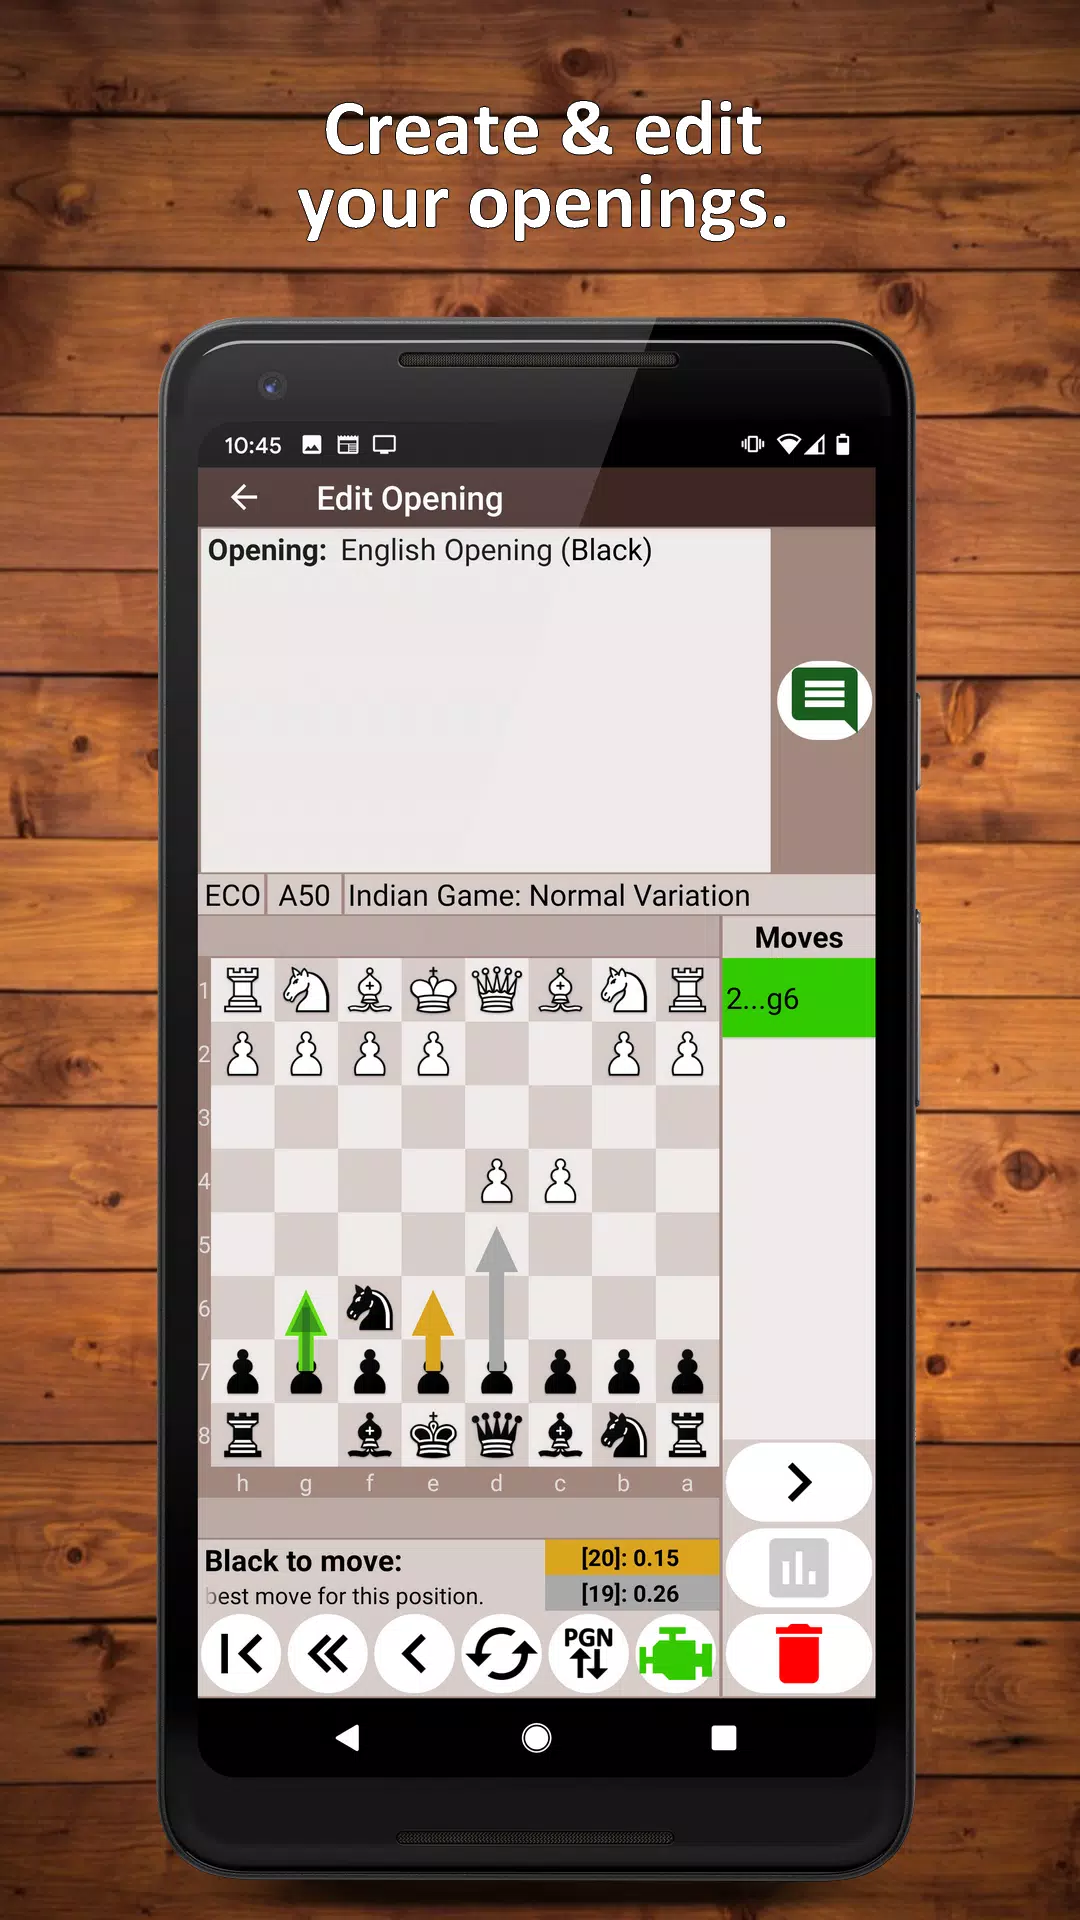 Lite lichess - Online Chess APK (Android Game) - Free Download